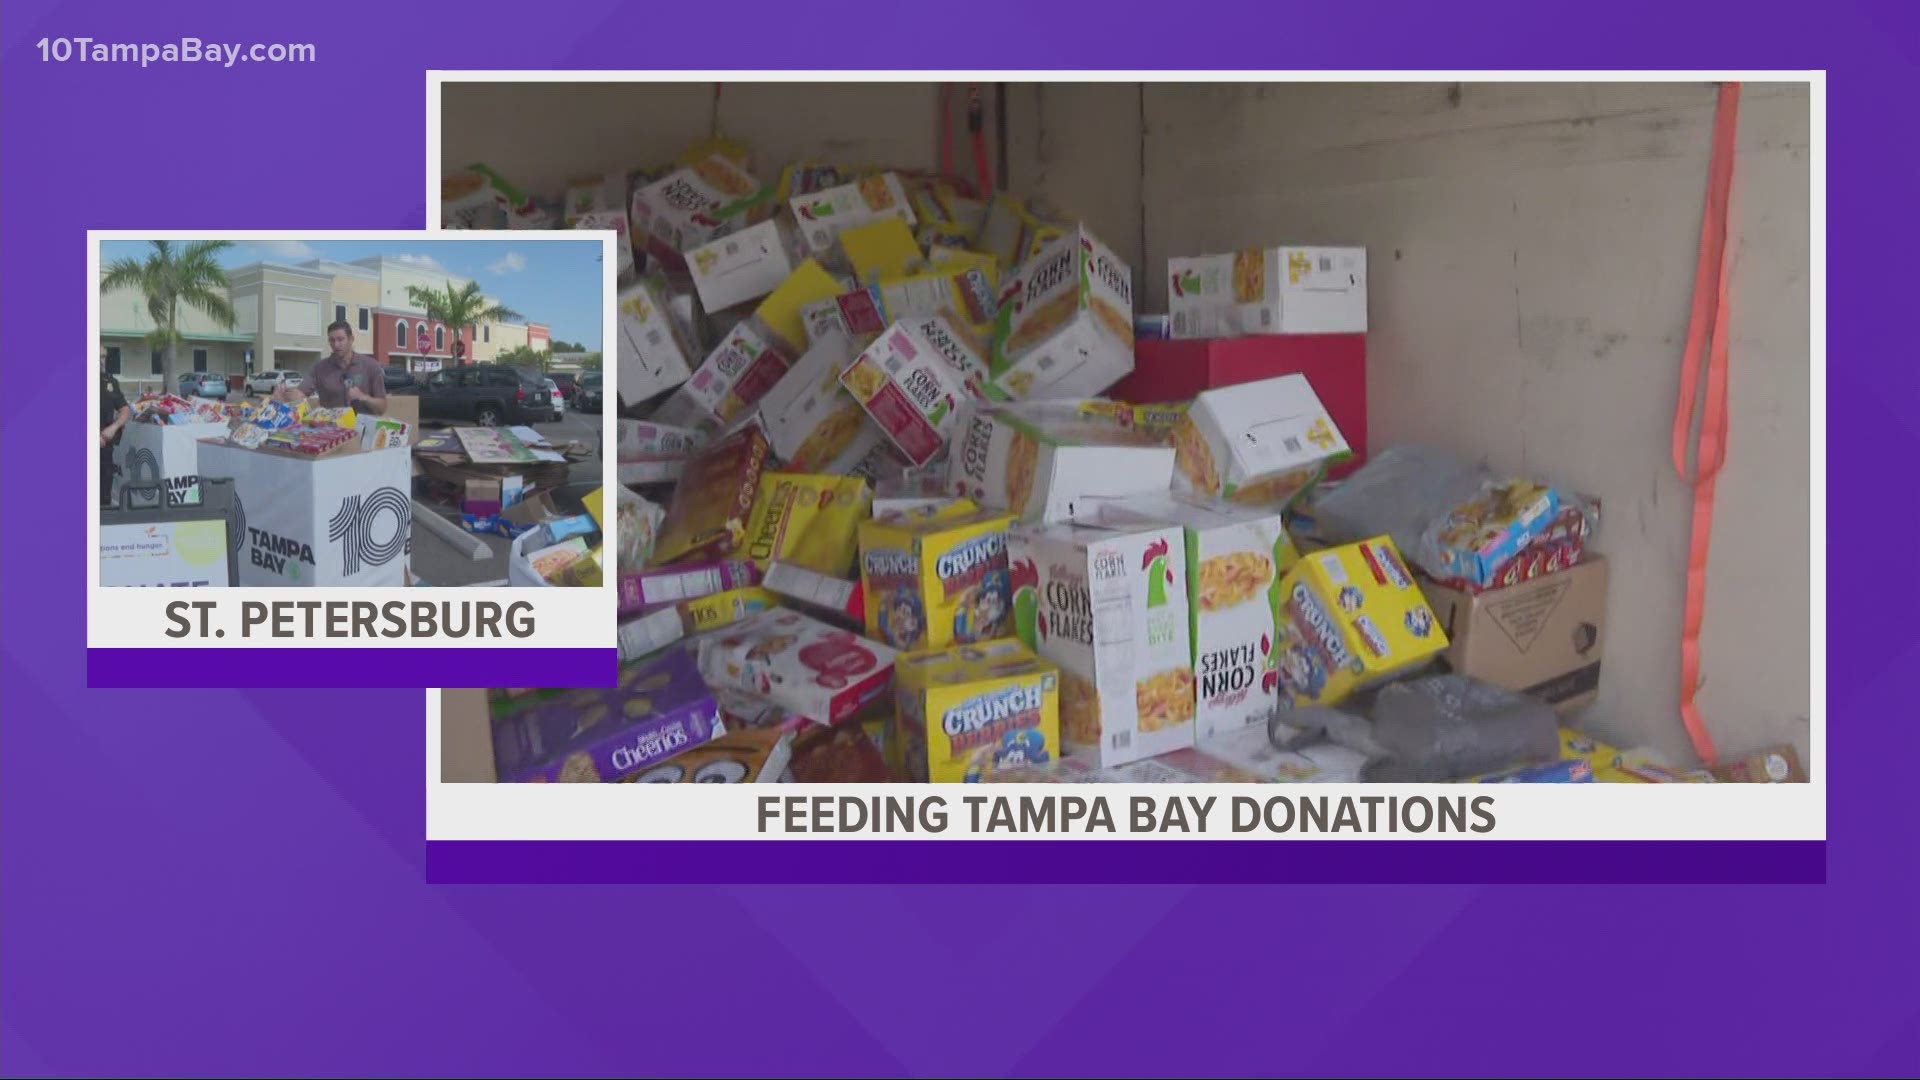 10 Tampa Bay has partnered with Feeding Tampa Bay for its annual Cereal for Summer drive to help feed children in need across the Tampa Bay area.